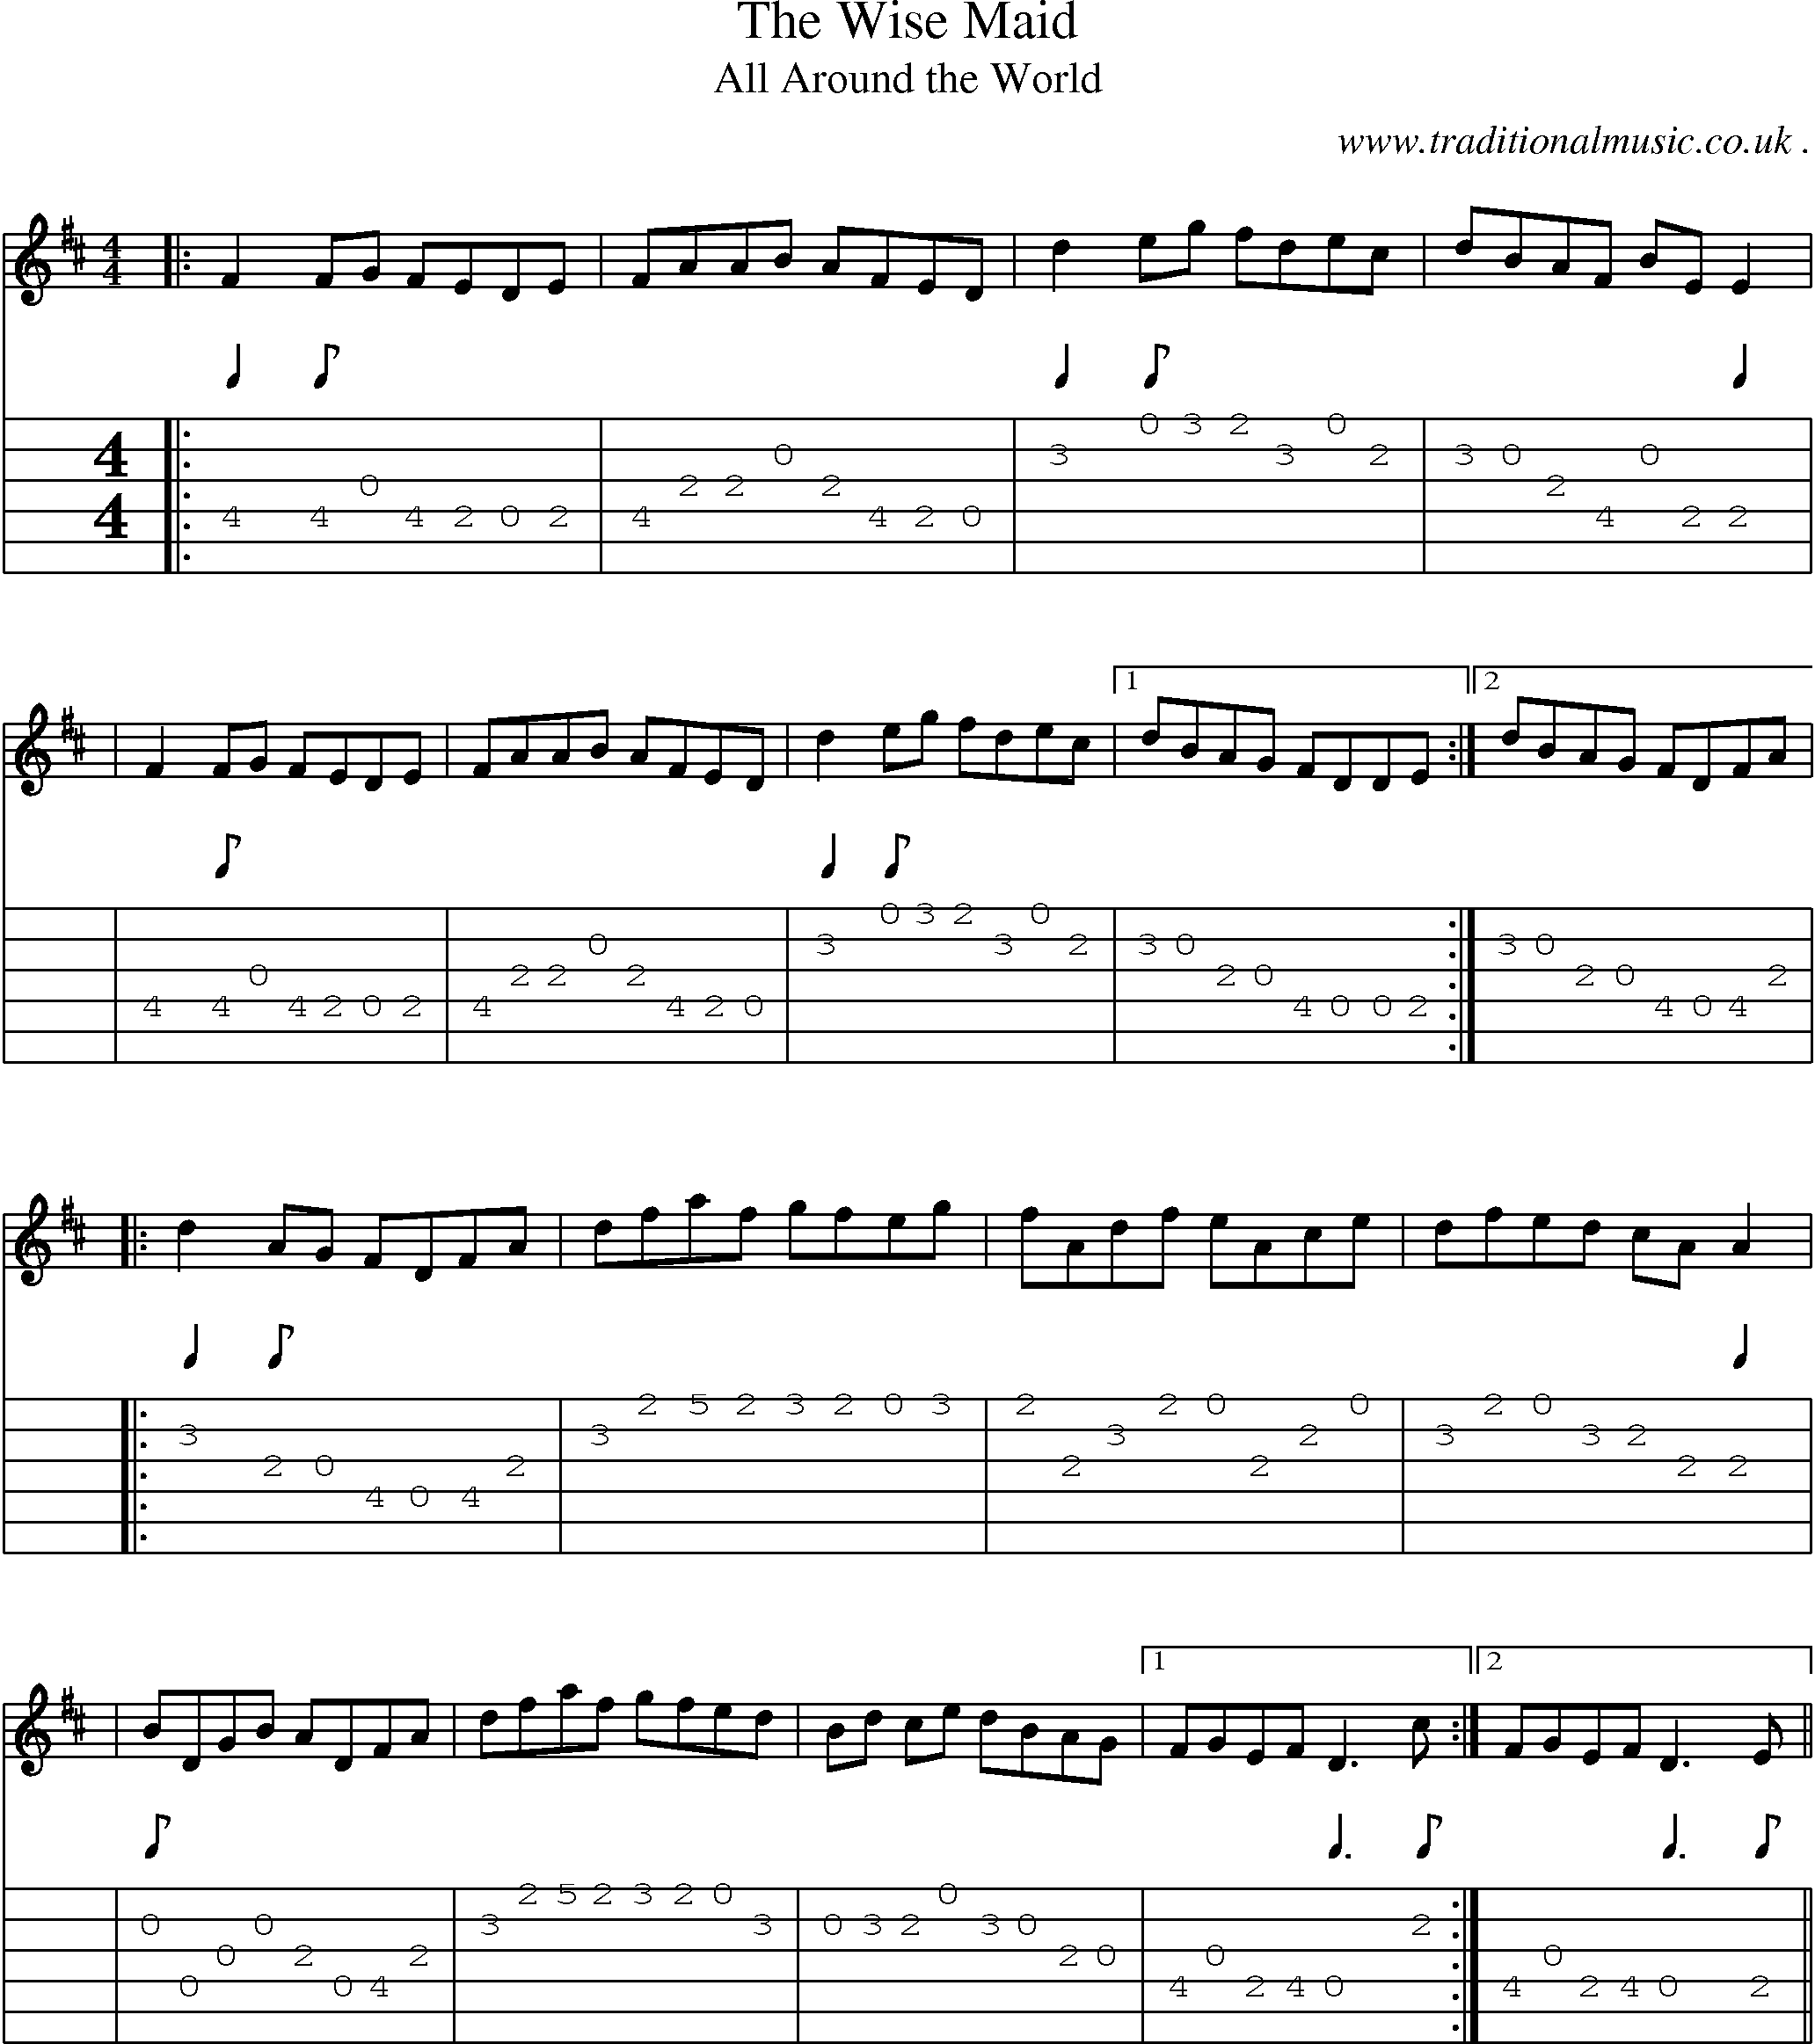 Sheet-Music and Guitar Tabs for The Wise Maid